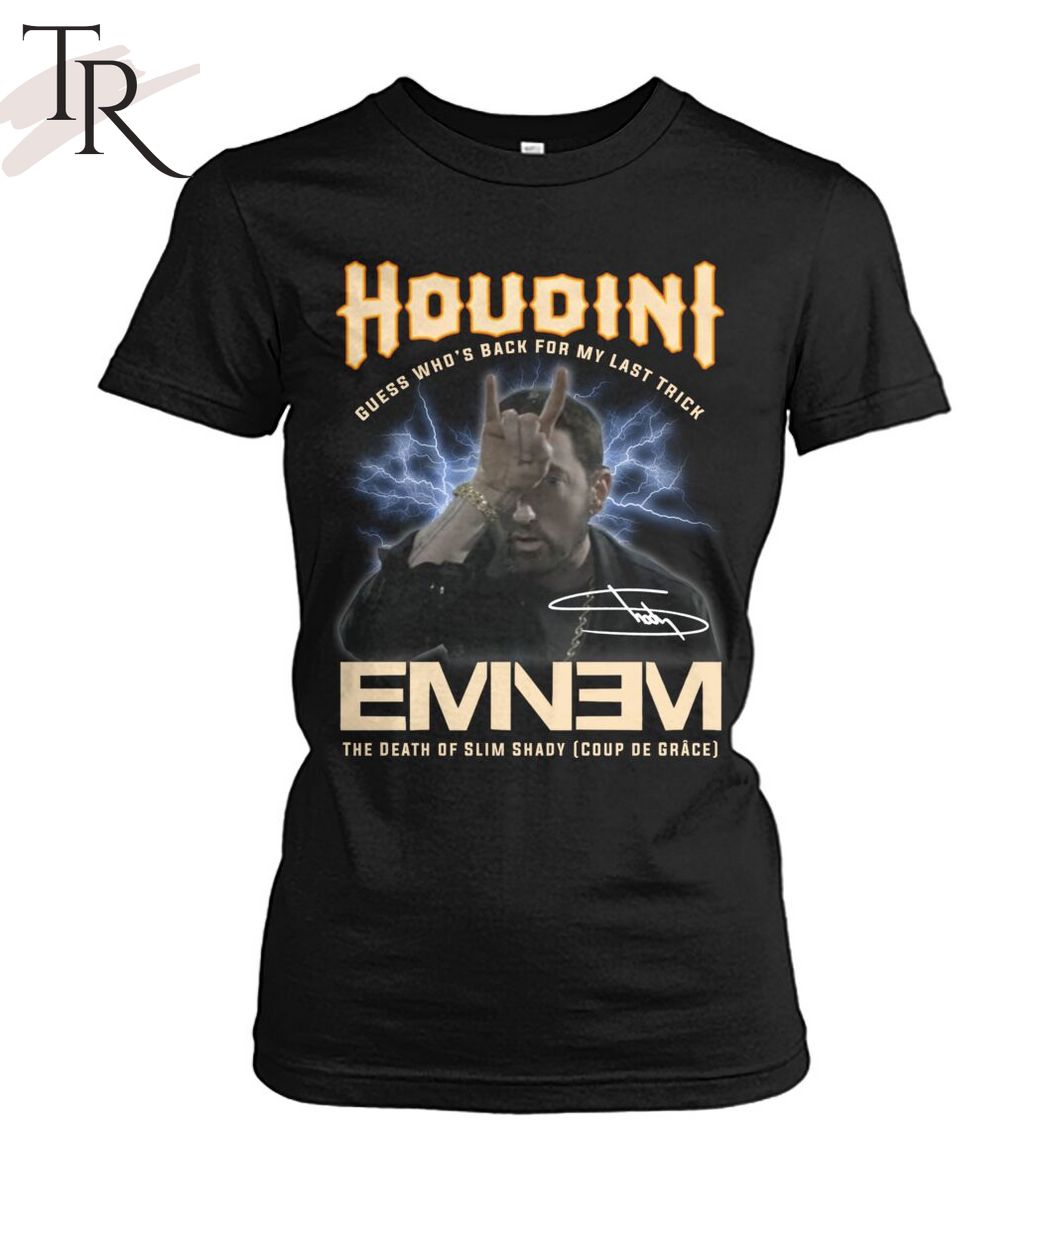 Houdini Guess Who's Back For My Last Trick Eminem The Death Of Slim Shady T-Shirt